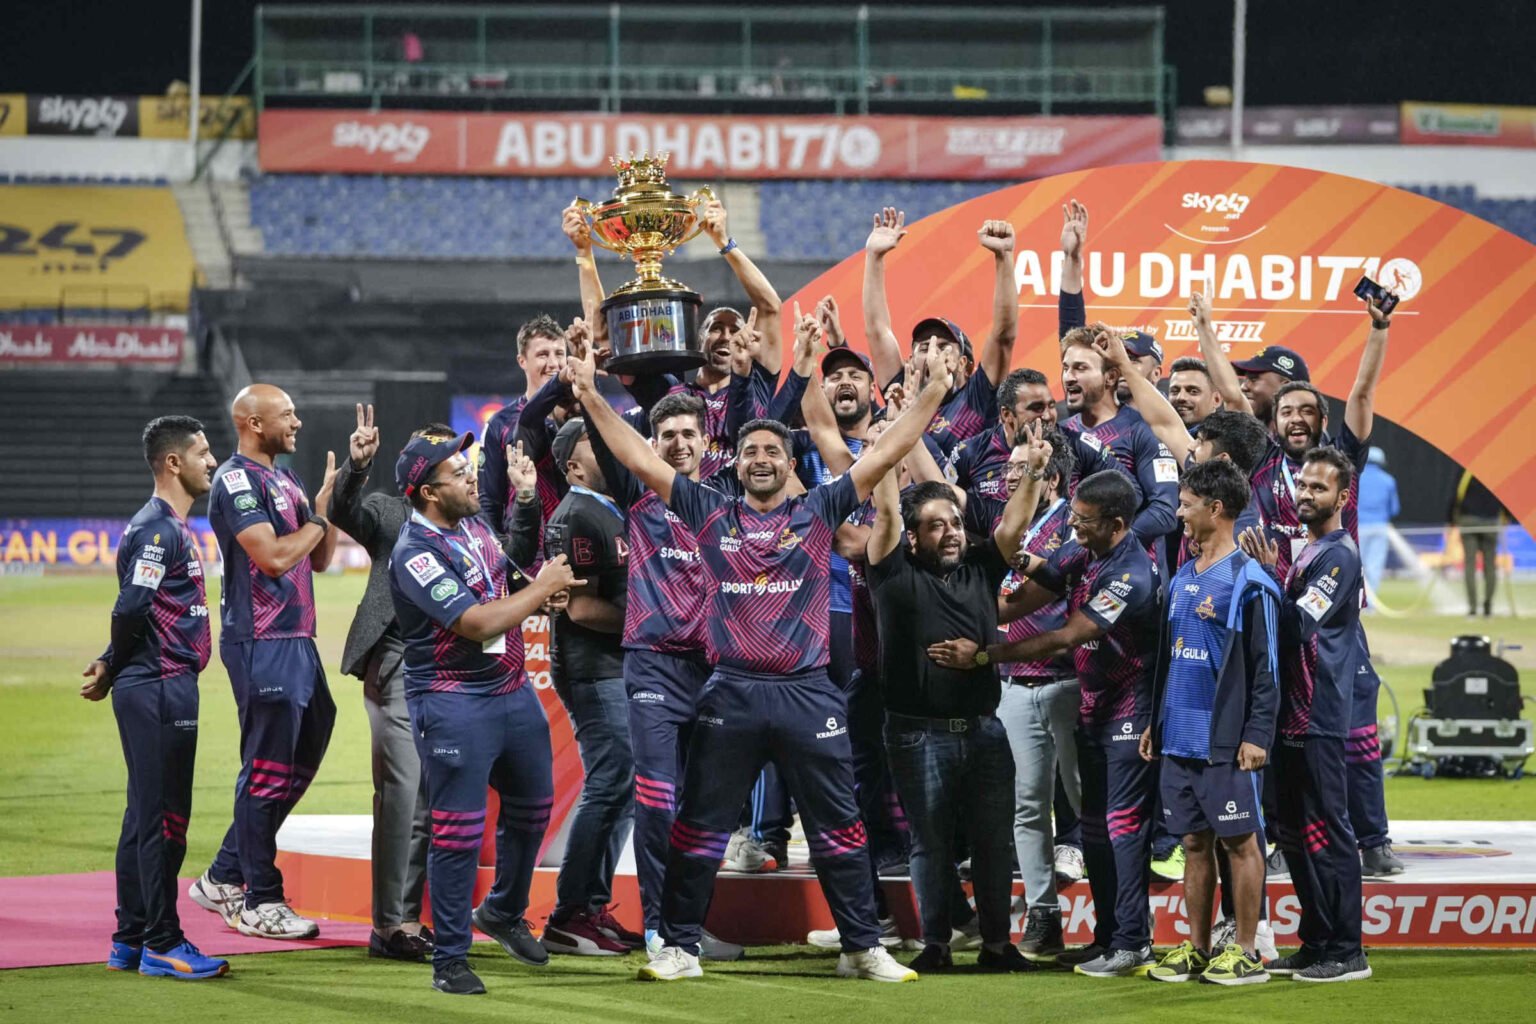 Which team are you rooting for? Get out your favorite sports gear so you can catch the Abu Dhabi T10 League 2021 live streaming right from home!